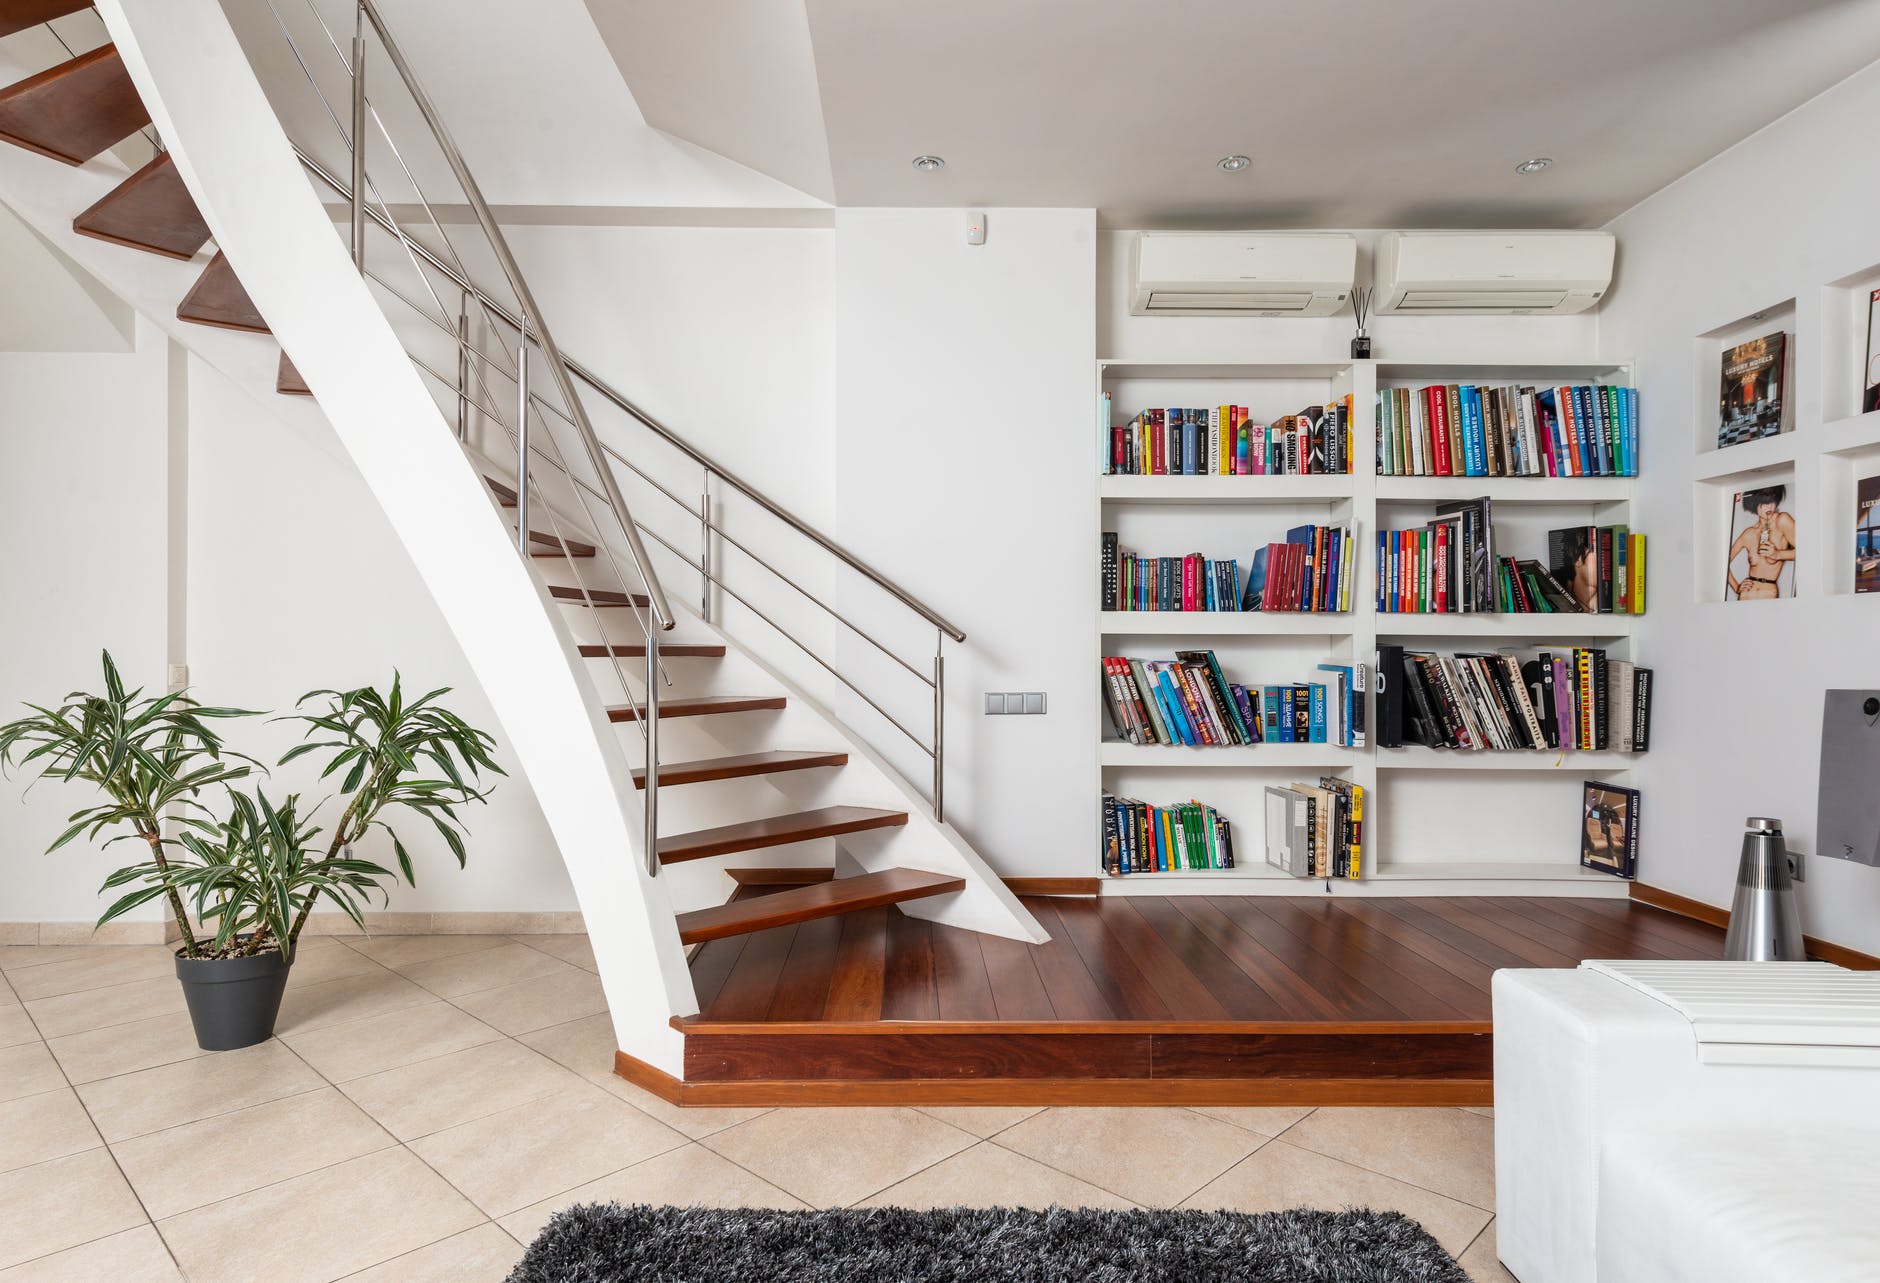 collection of books against modern stairs in house